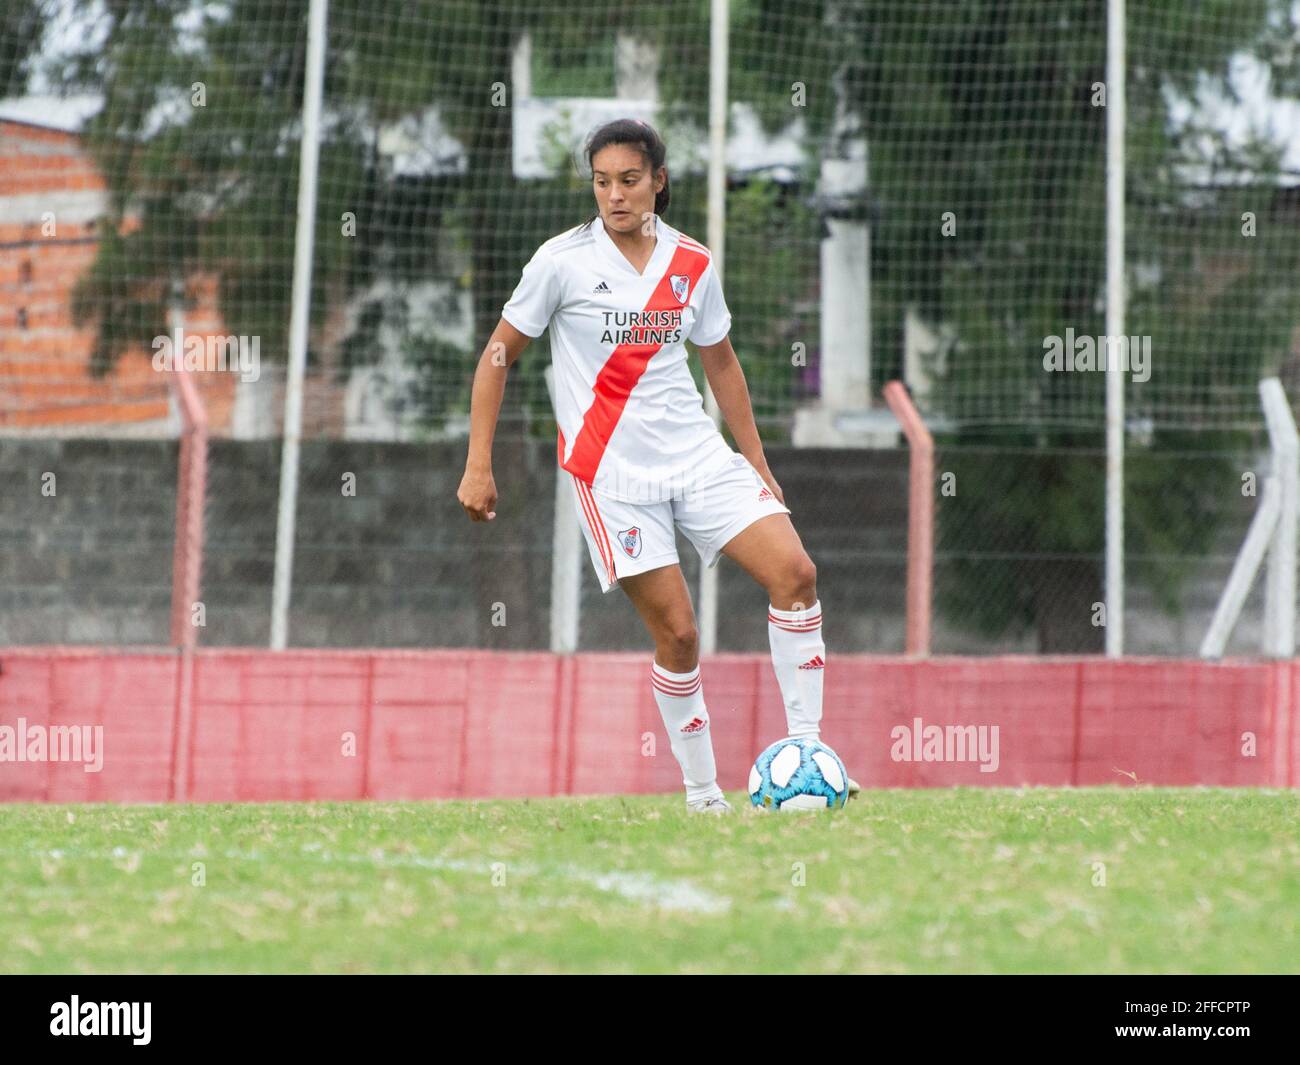 Buenos Aires, Argentina. 24th Apr, 2021. Lourdes Lezcano (#7 River) during the game between Independiente and River Plate at Villa Dominico in Avellaneda, Buenos Aires, Argentina. Credit: SPP Sport Press Photo. /Alamy Live News Stock Photo